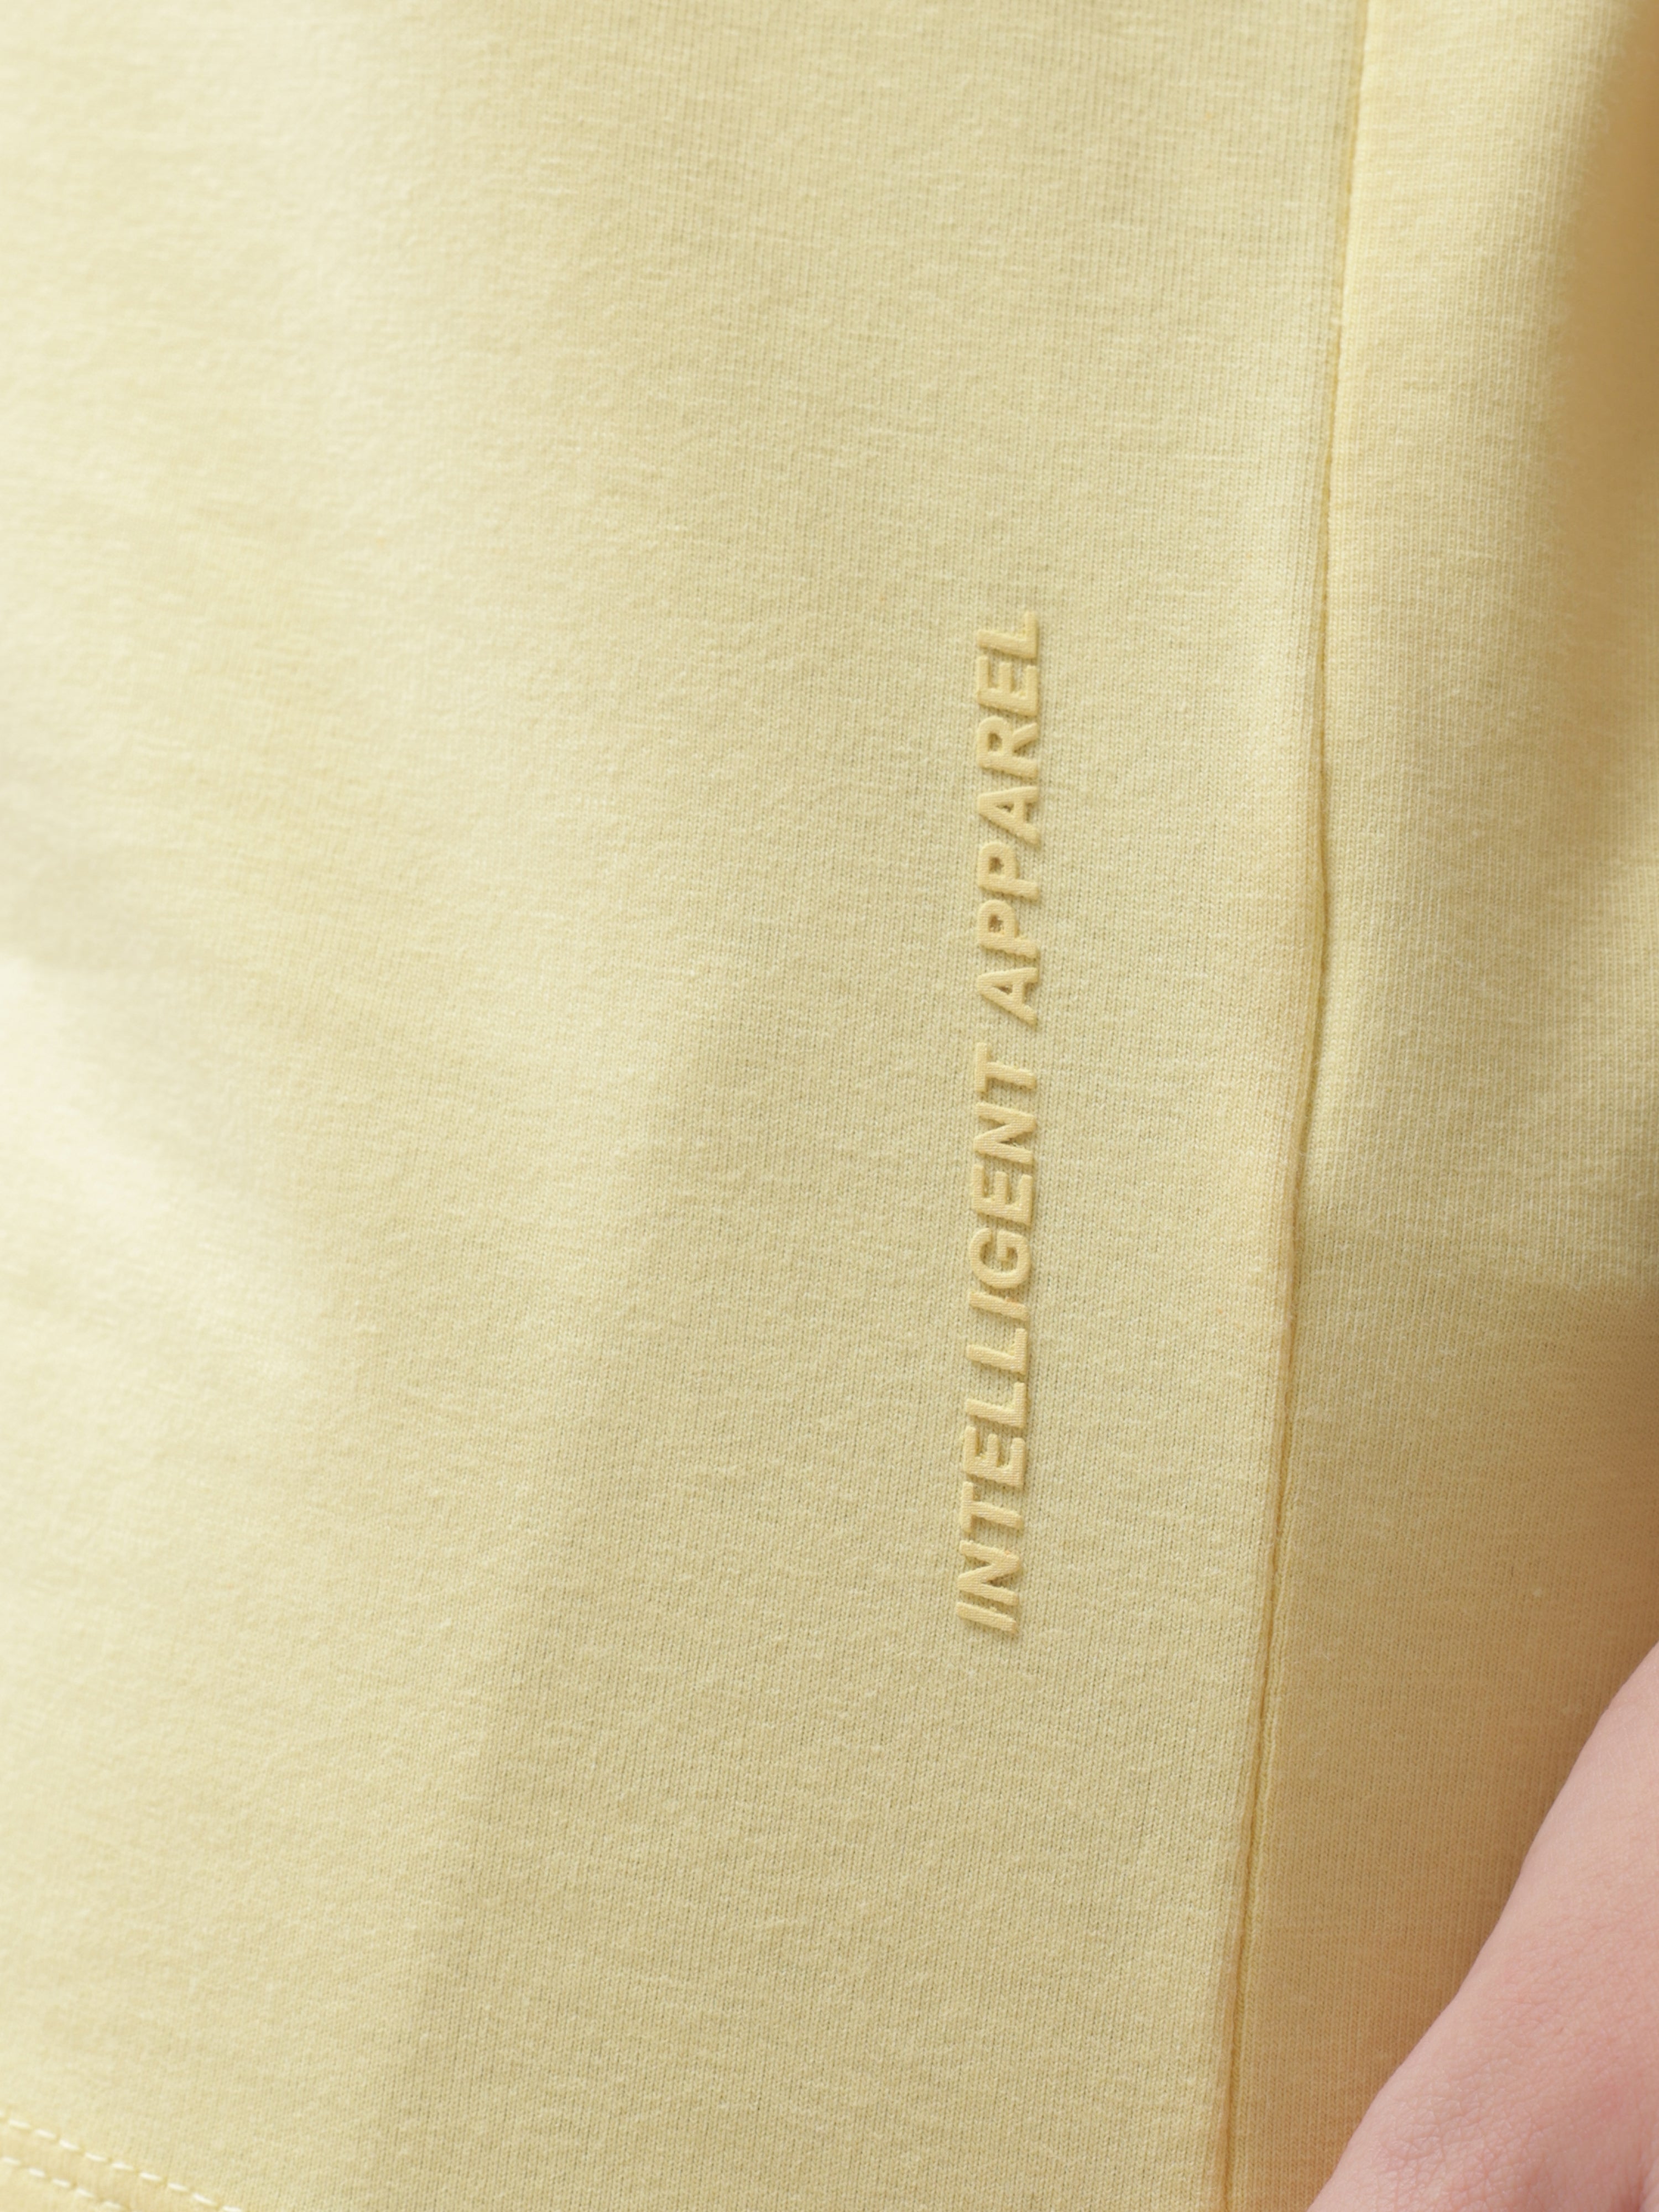 Stain-proof and odor-resistant yellow Turms T-shirt with "Intelligent Apparel" text on the side, showcasing premium cotton fabric.